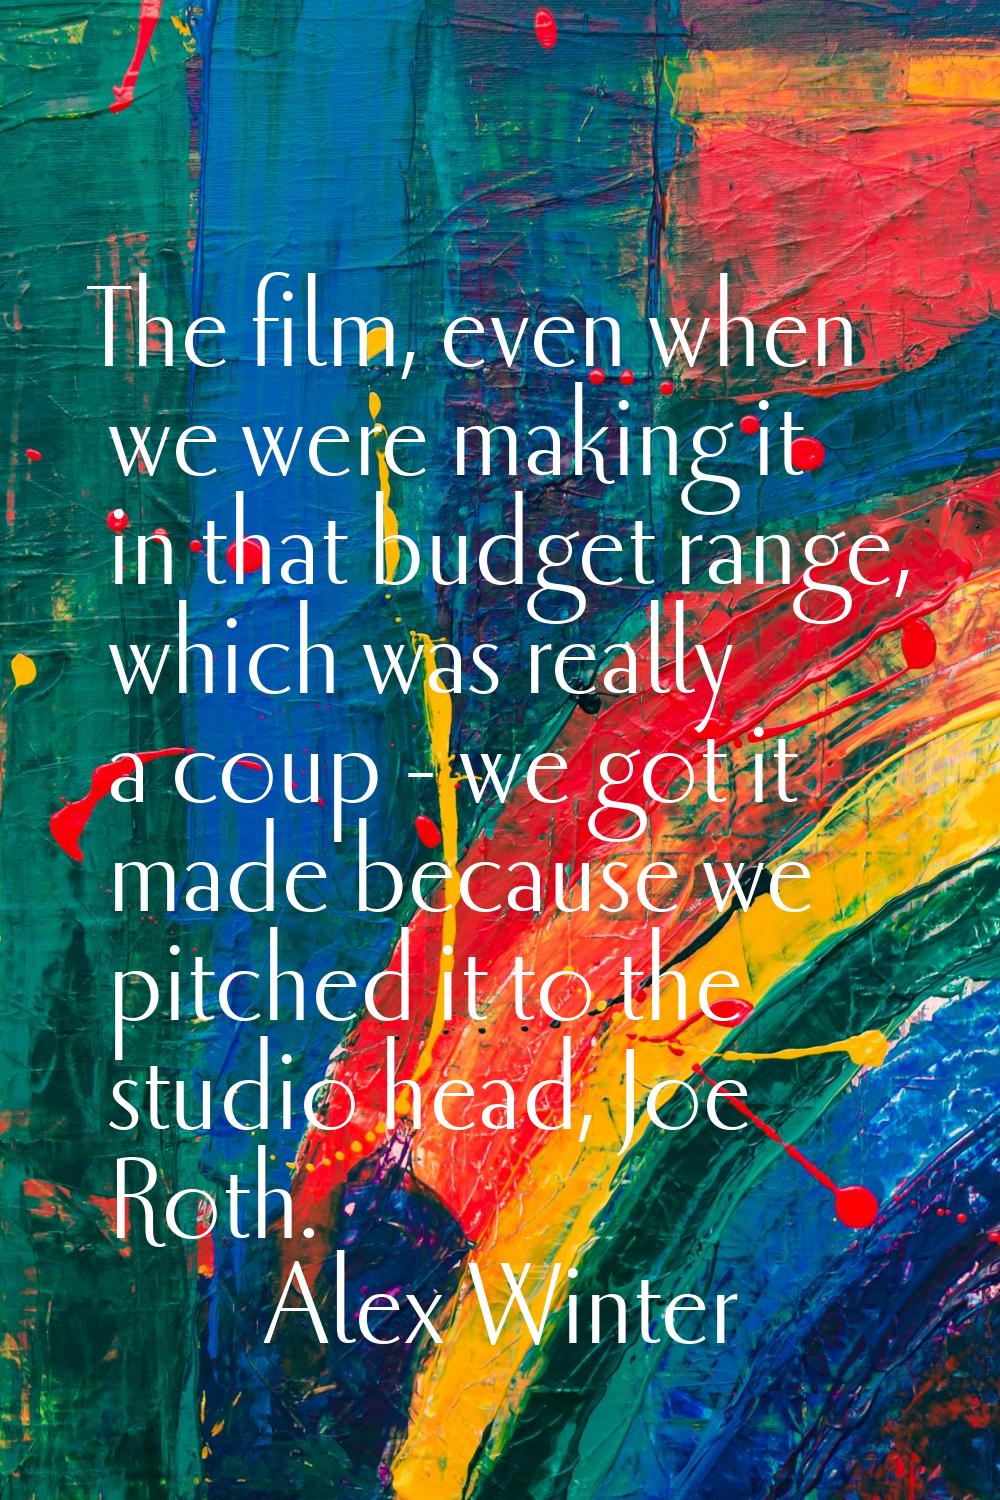 The film, even when we were making it in that budget range, which was really a coup - we got it mad